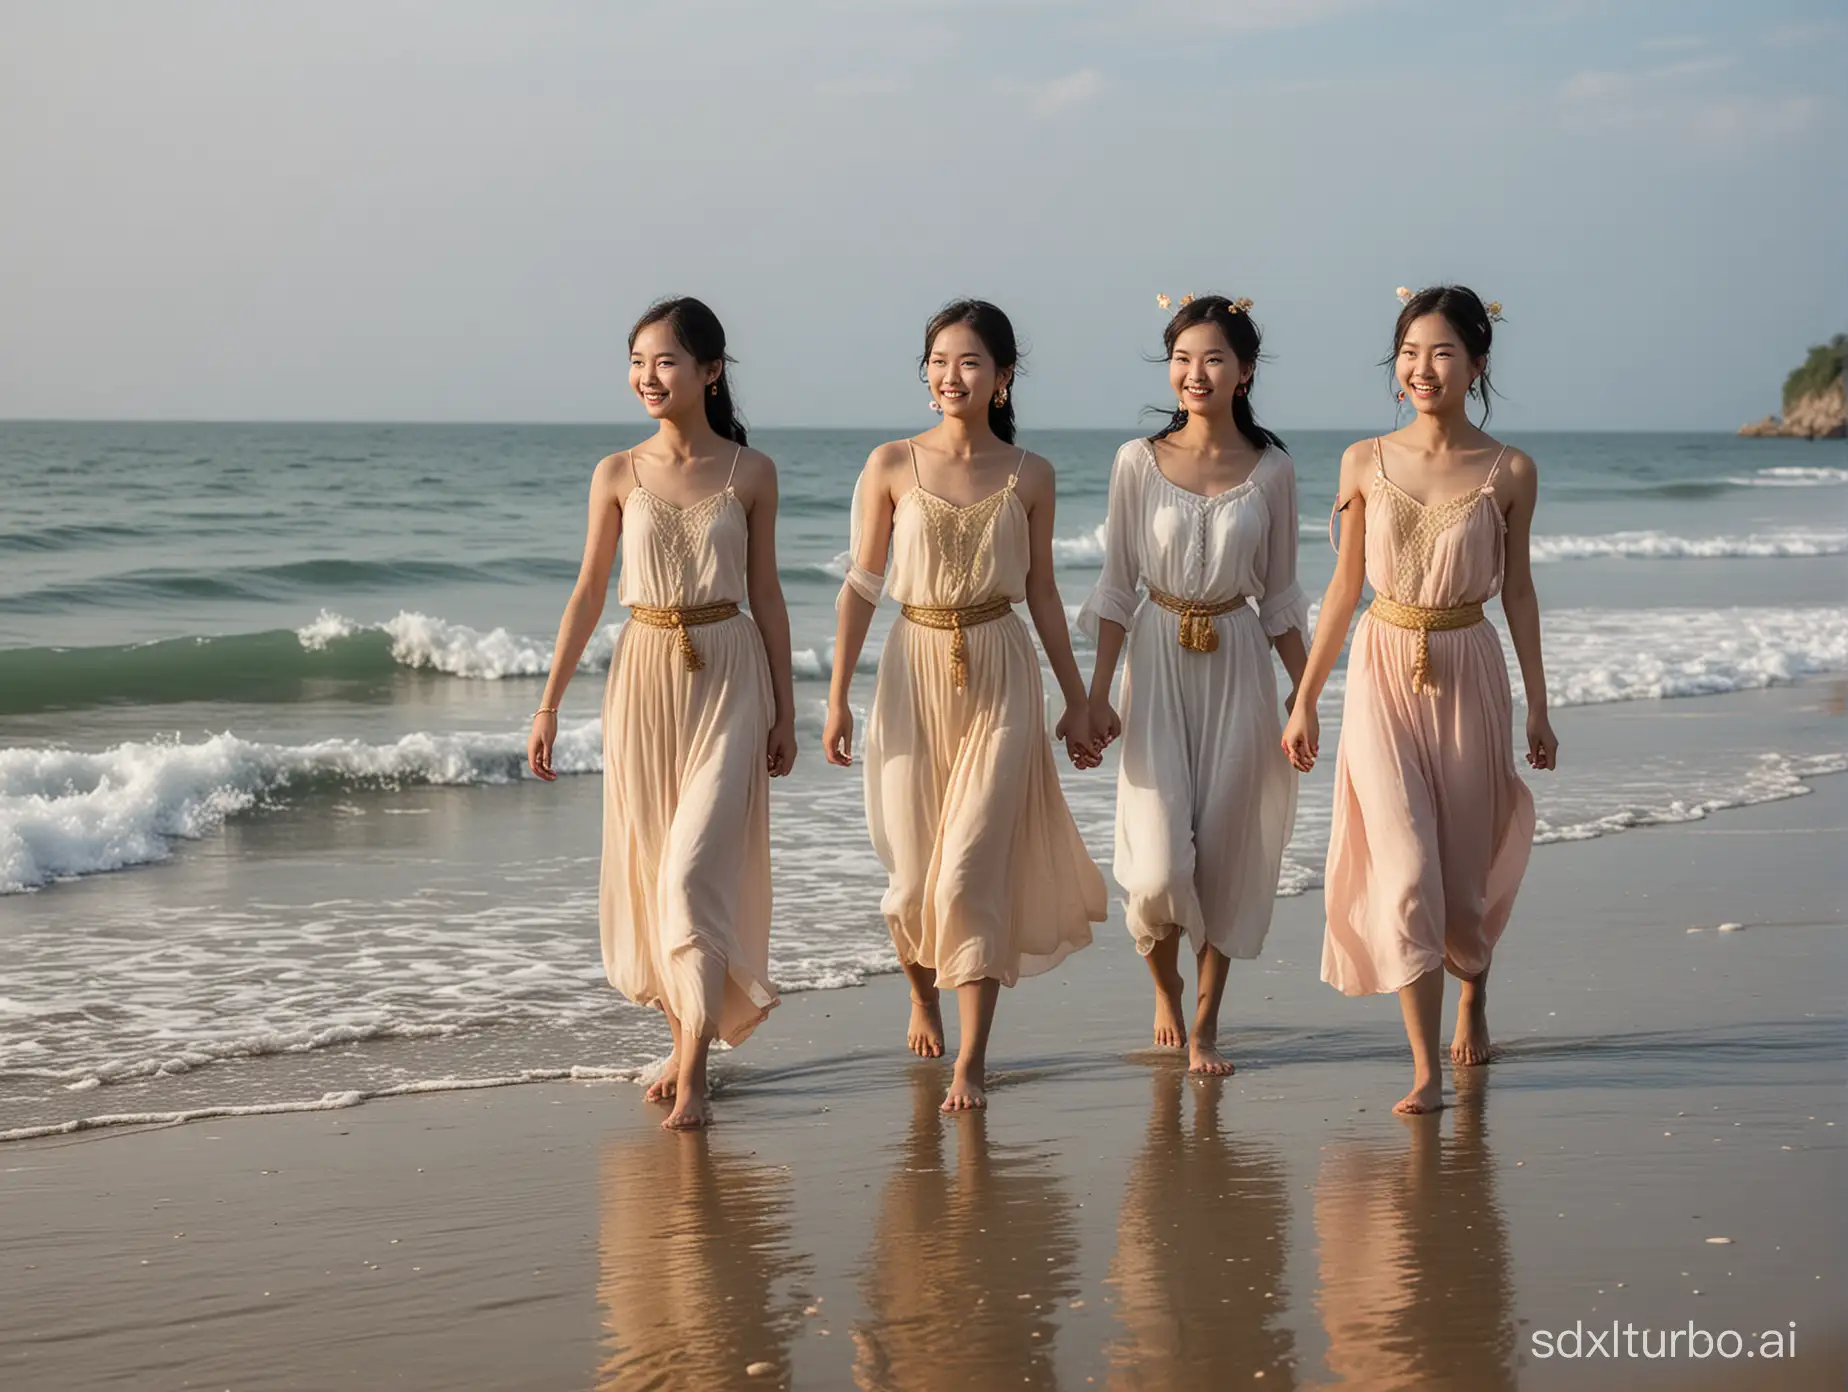 A group of Dai ethnic minority girls walked gracefully to the seaside. Their figures were slender, their steps light, and their demeanor graceful, as if a group of beautiful fairies had descended from the sky, playing by the sea.